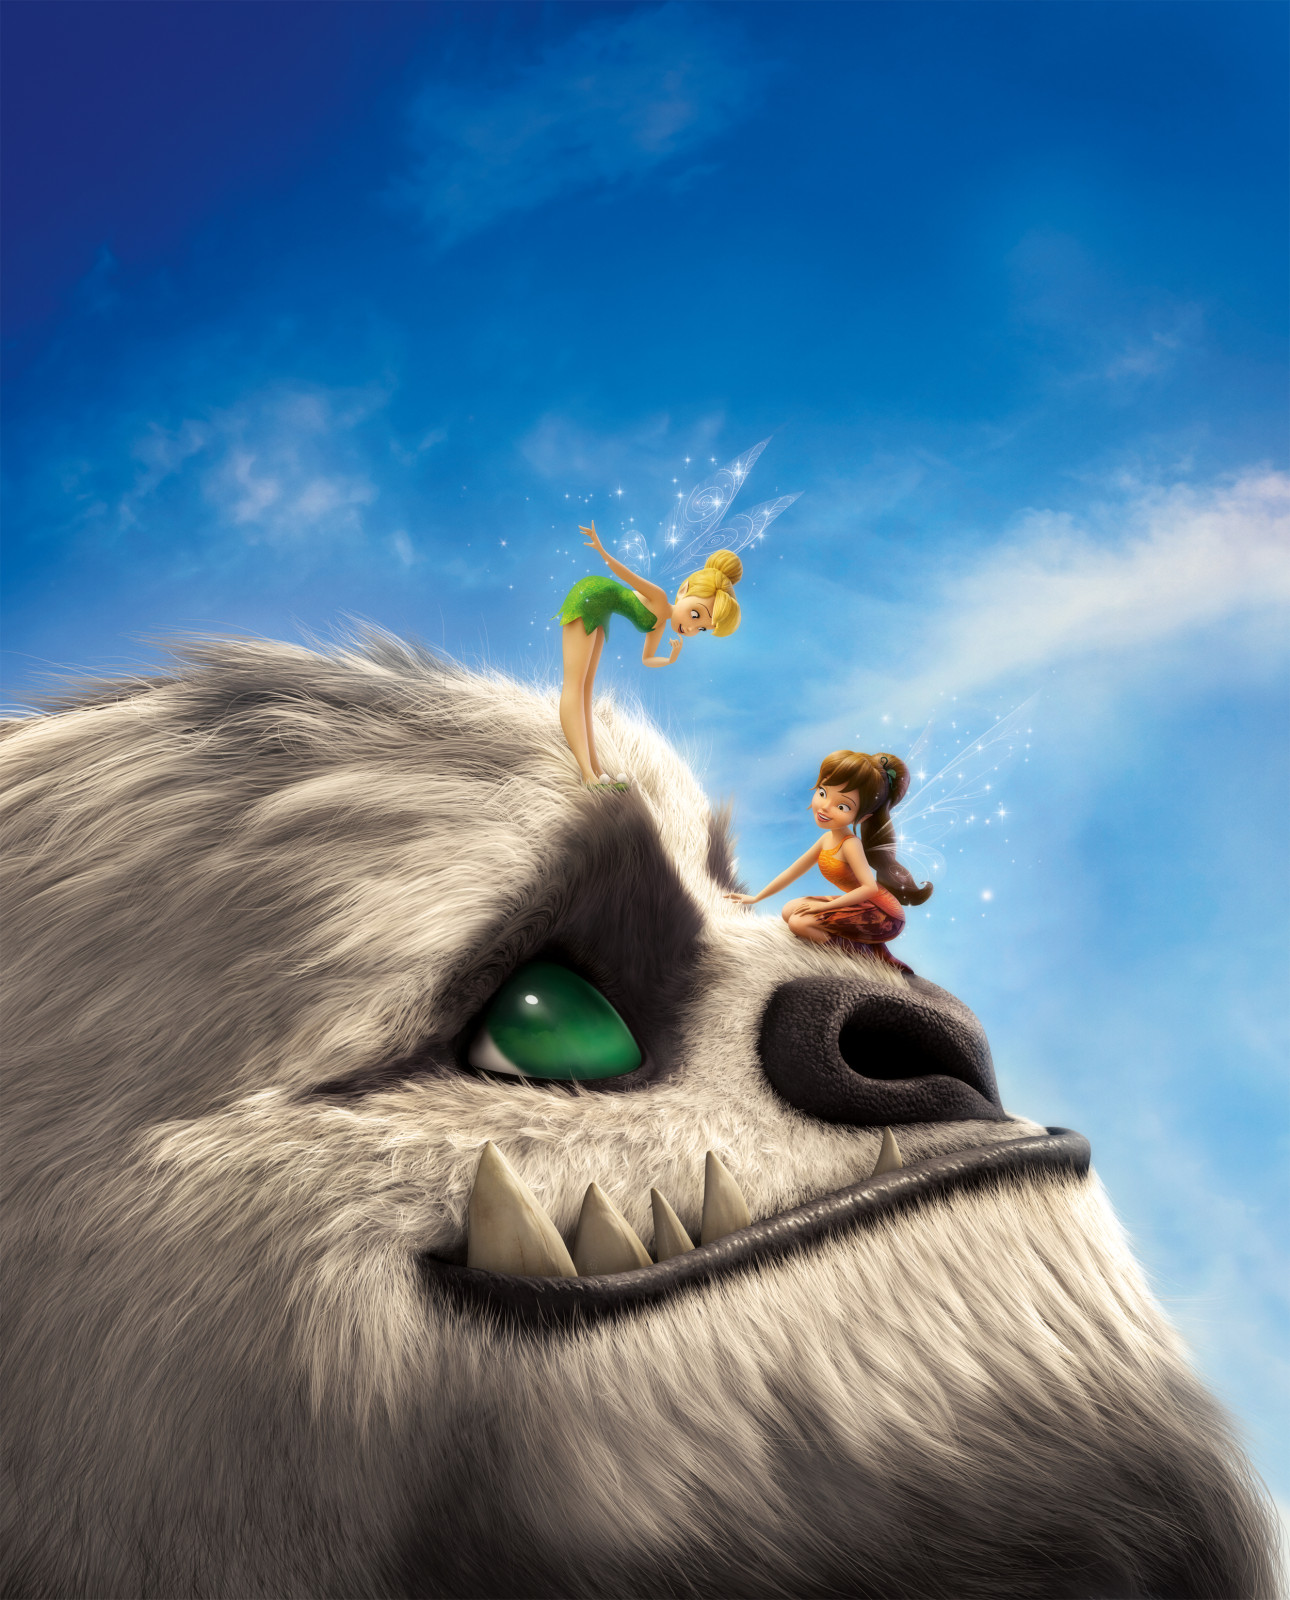 Tinker Bell and the Legend of the Neverbeast